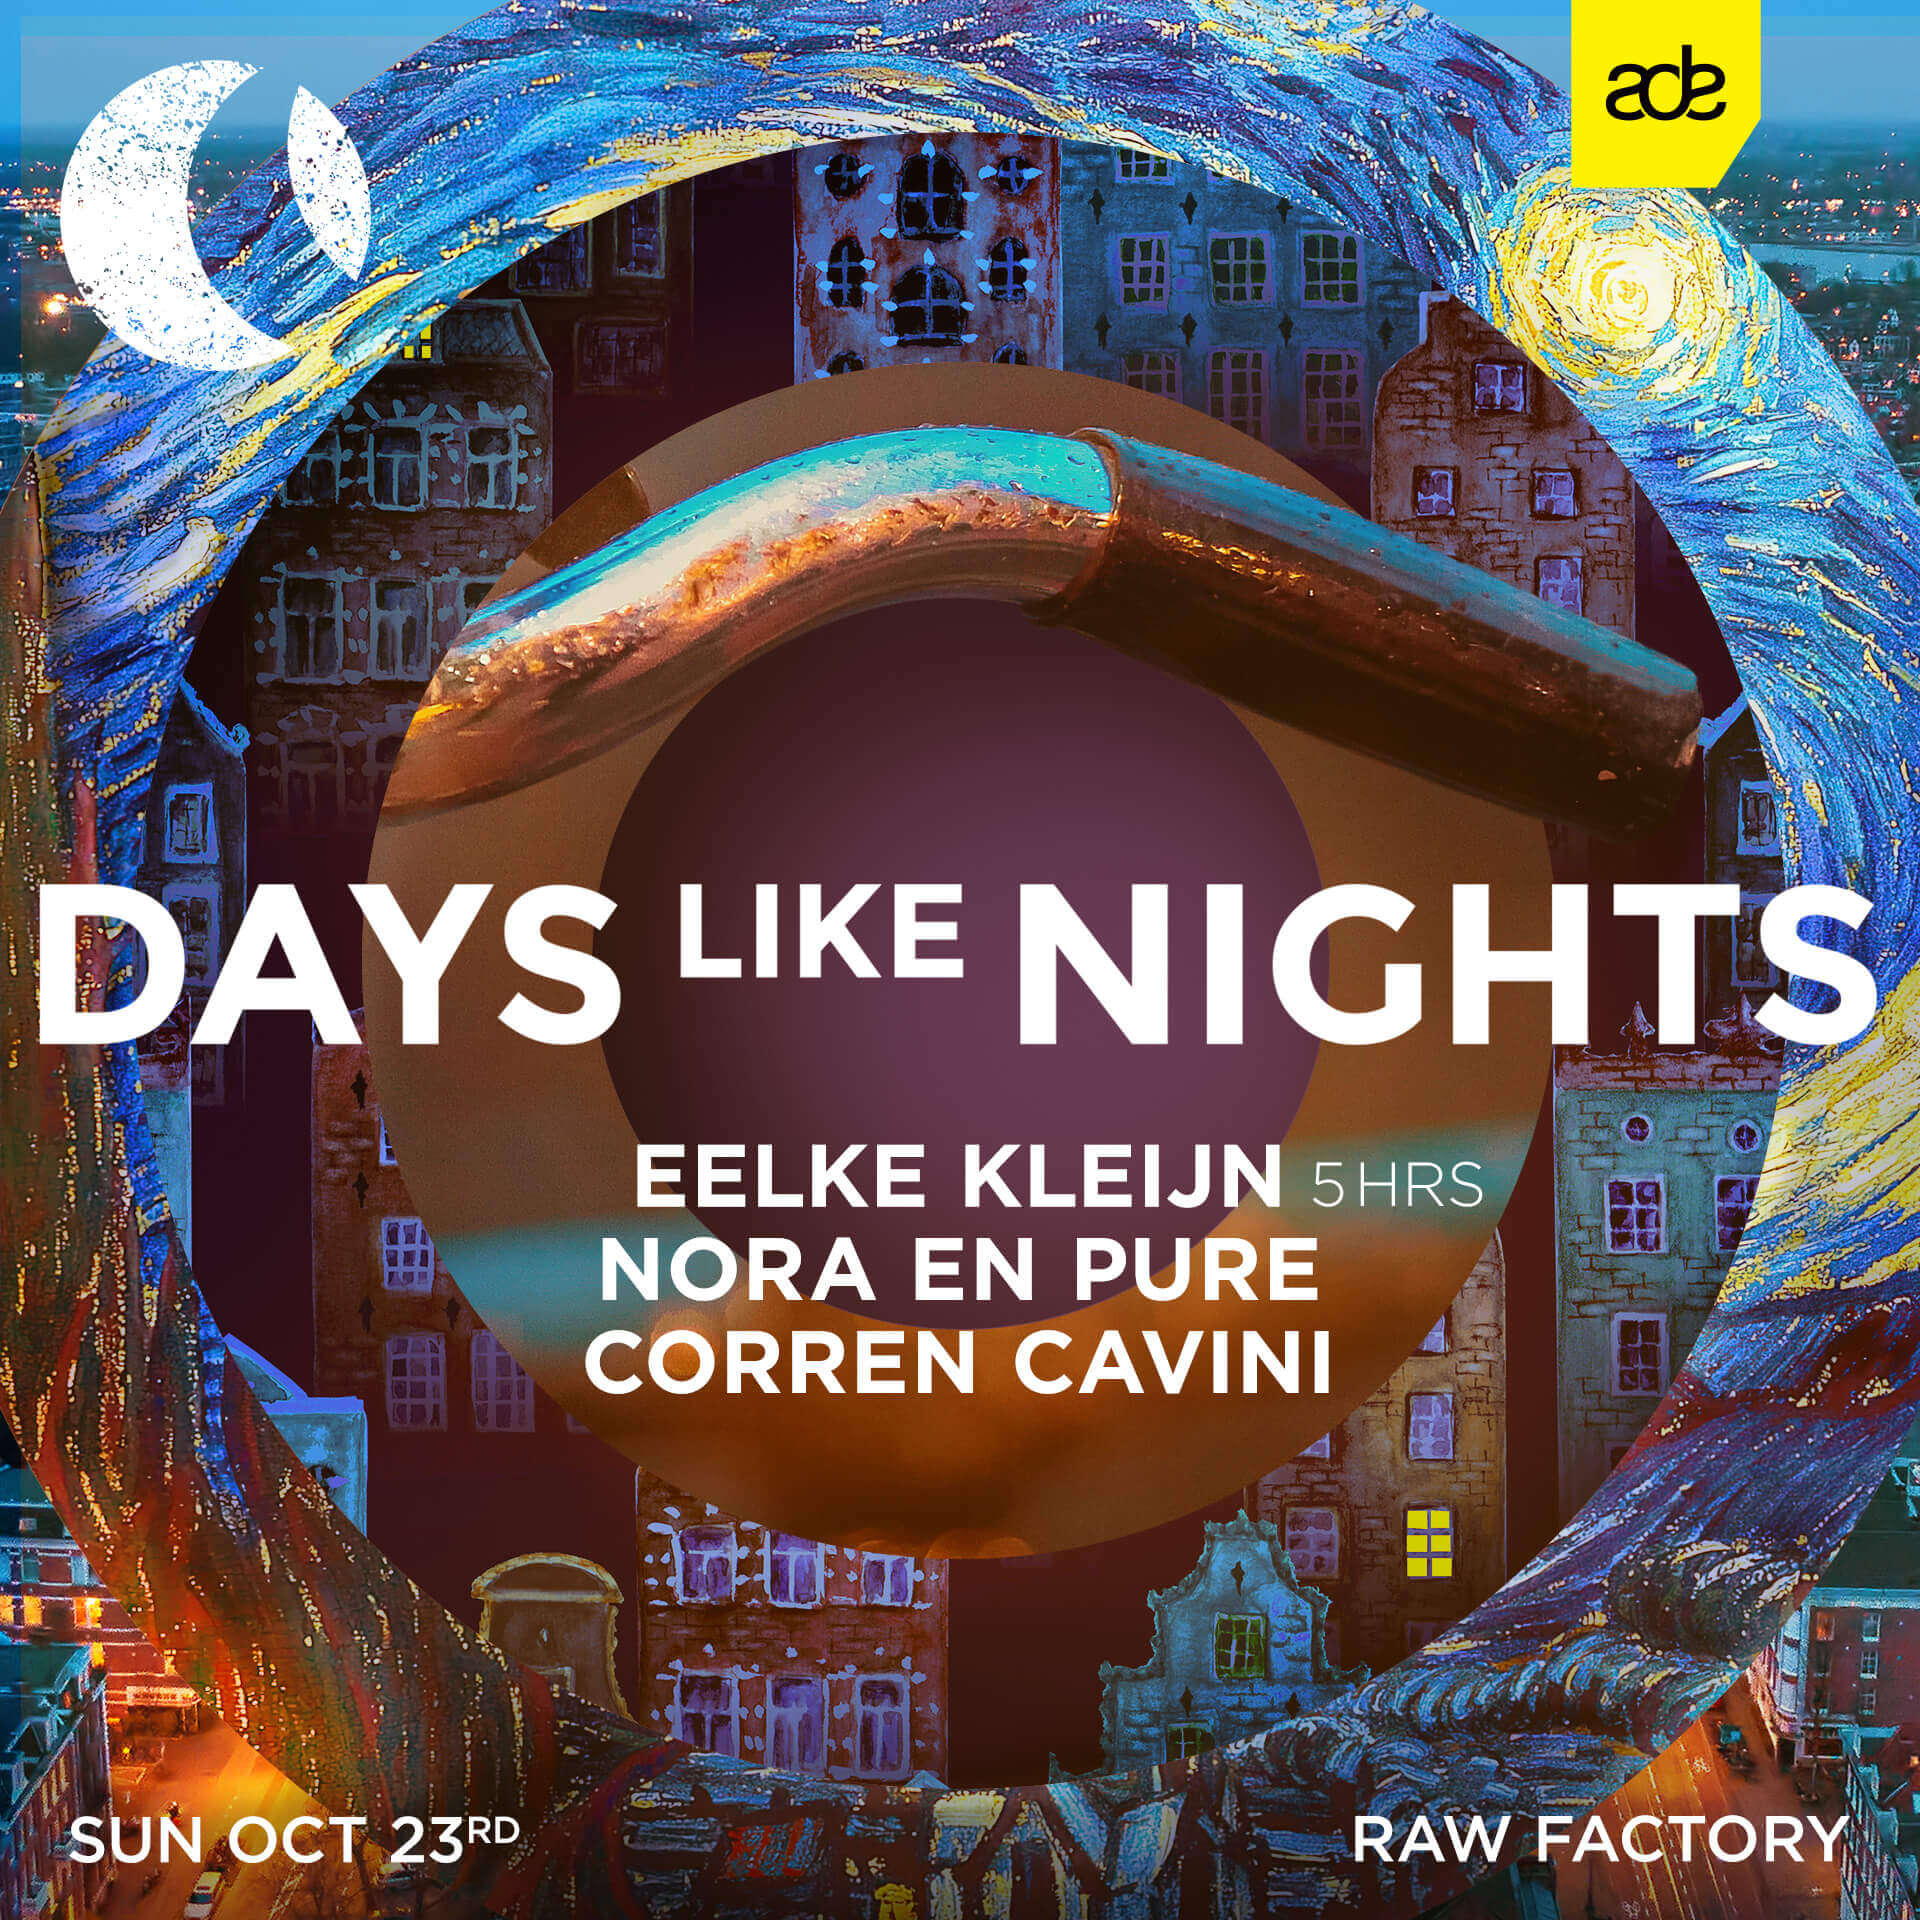 DAYS like NIGHTS will be at the ADE 2022!